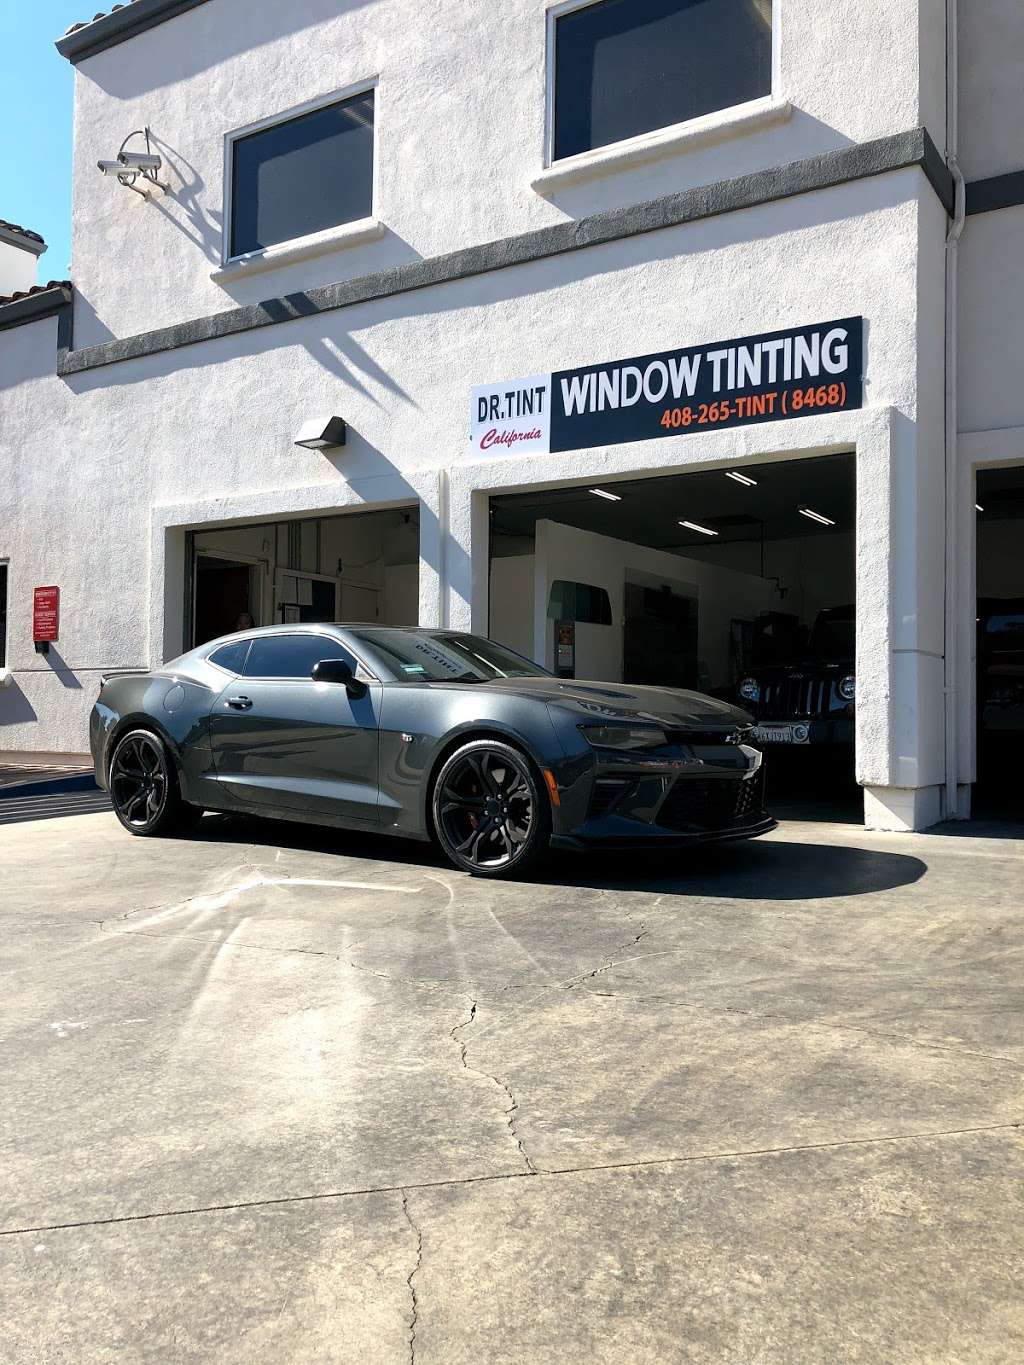 Dr. Tint California - Commercial Window Tinting & Glass Coating  | 735 Capitol Expy, San Jose, CA 95136 | Phone: (408) 265-8468